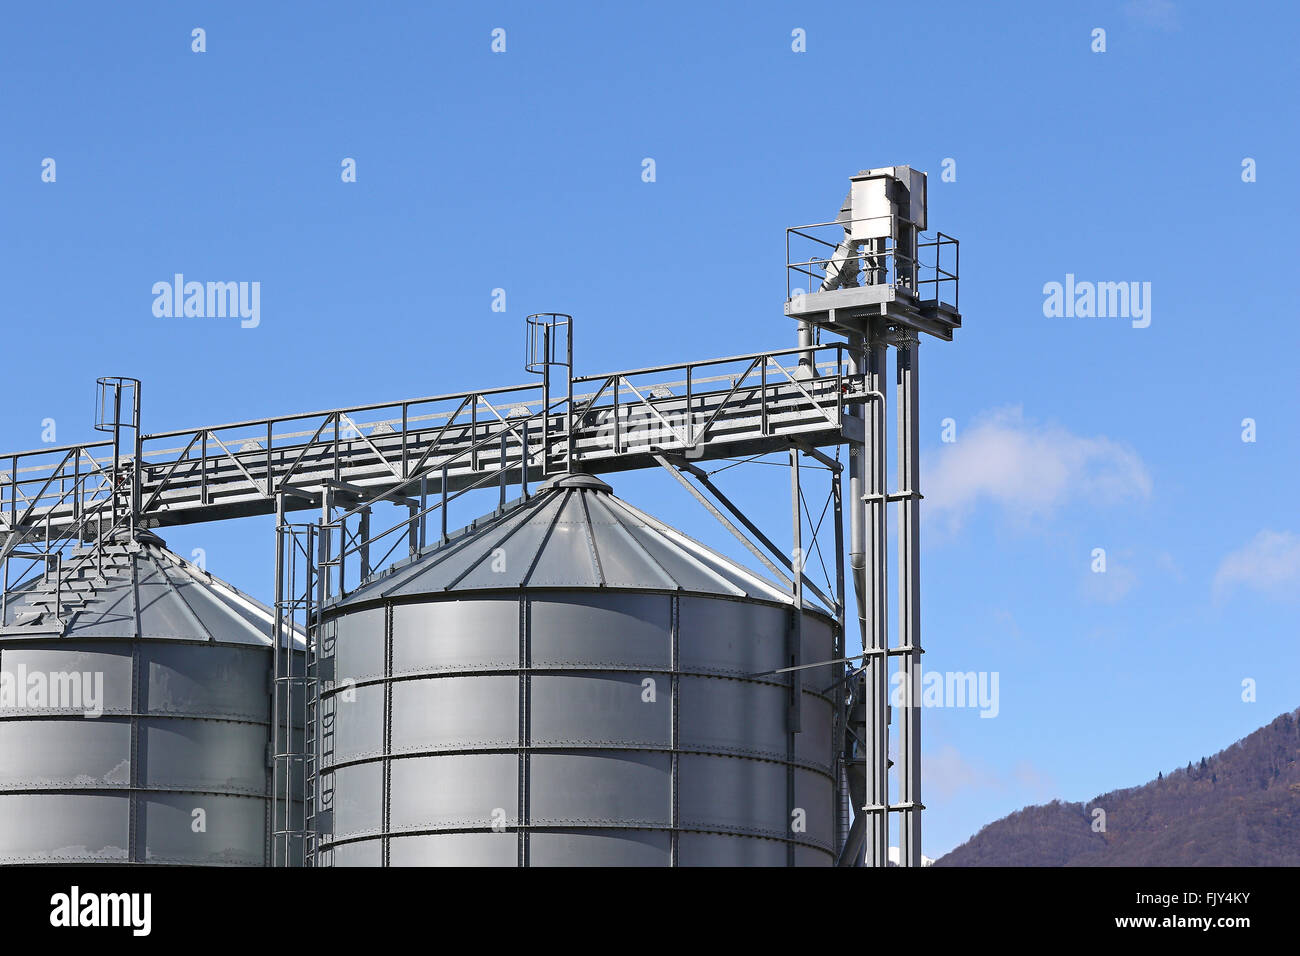 Top of agricultural storage silos against blue skies Stock Photo